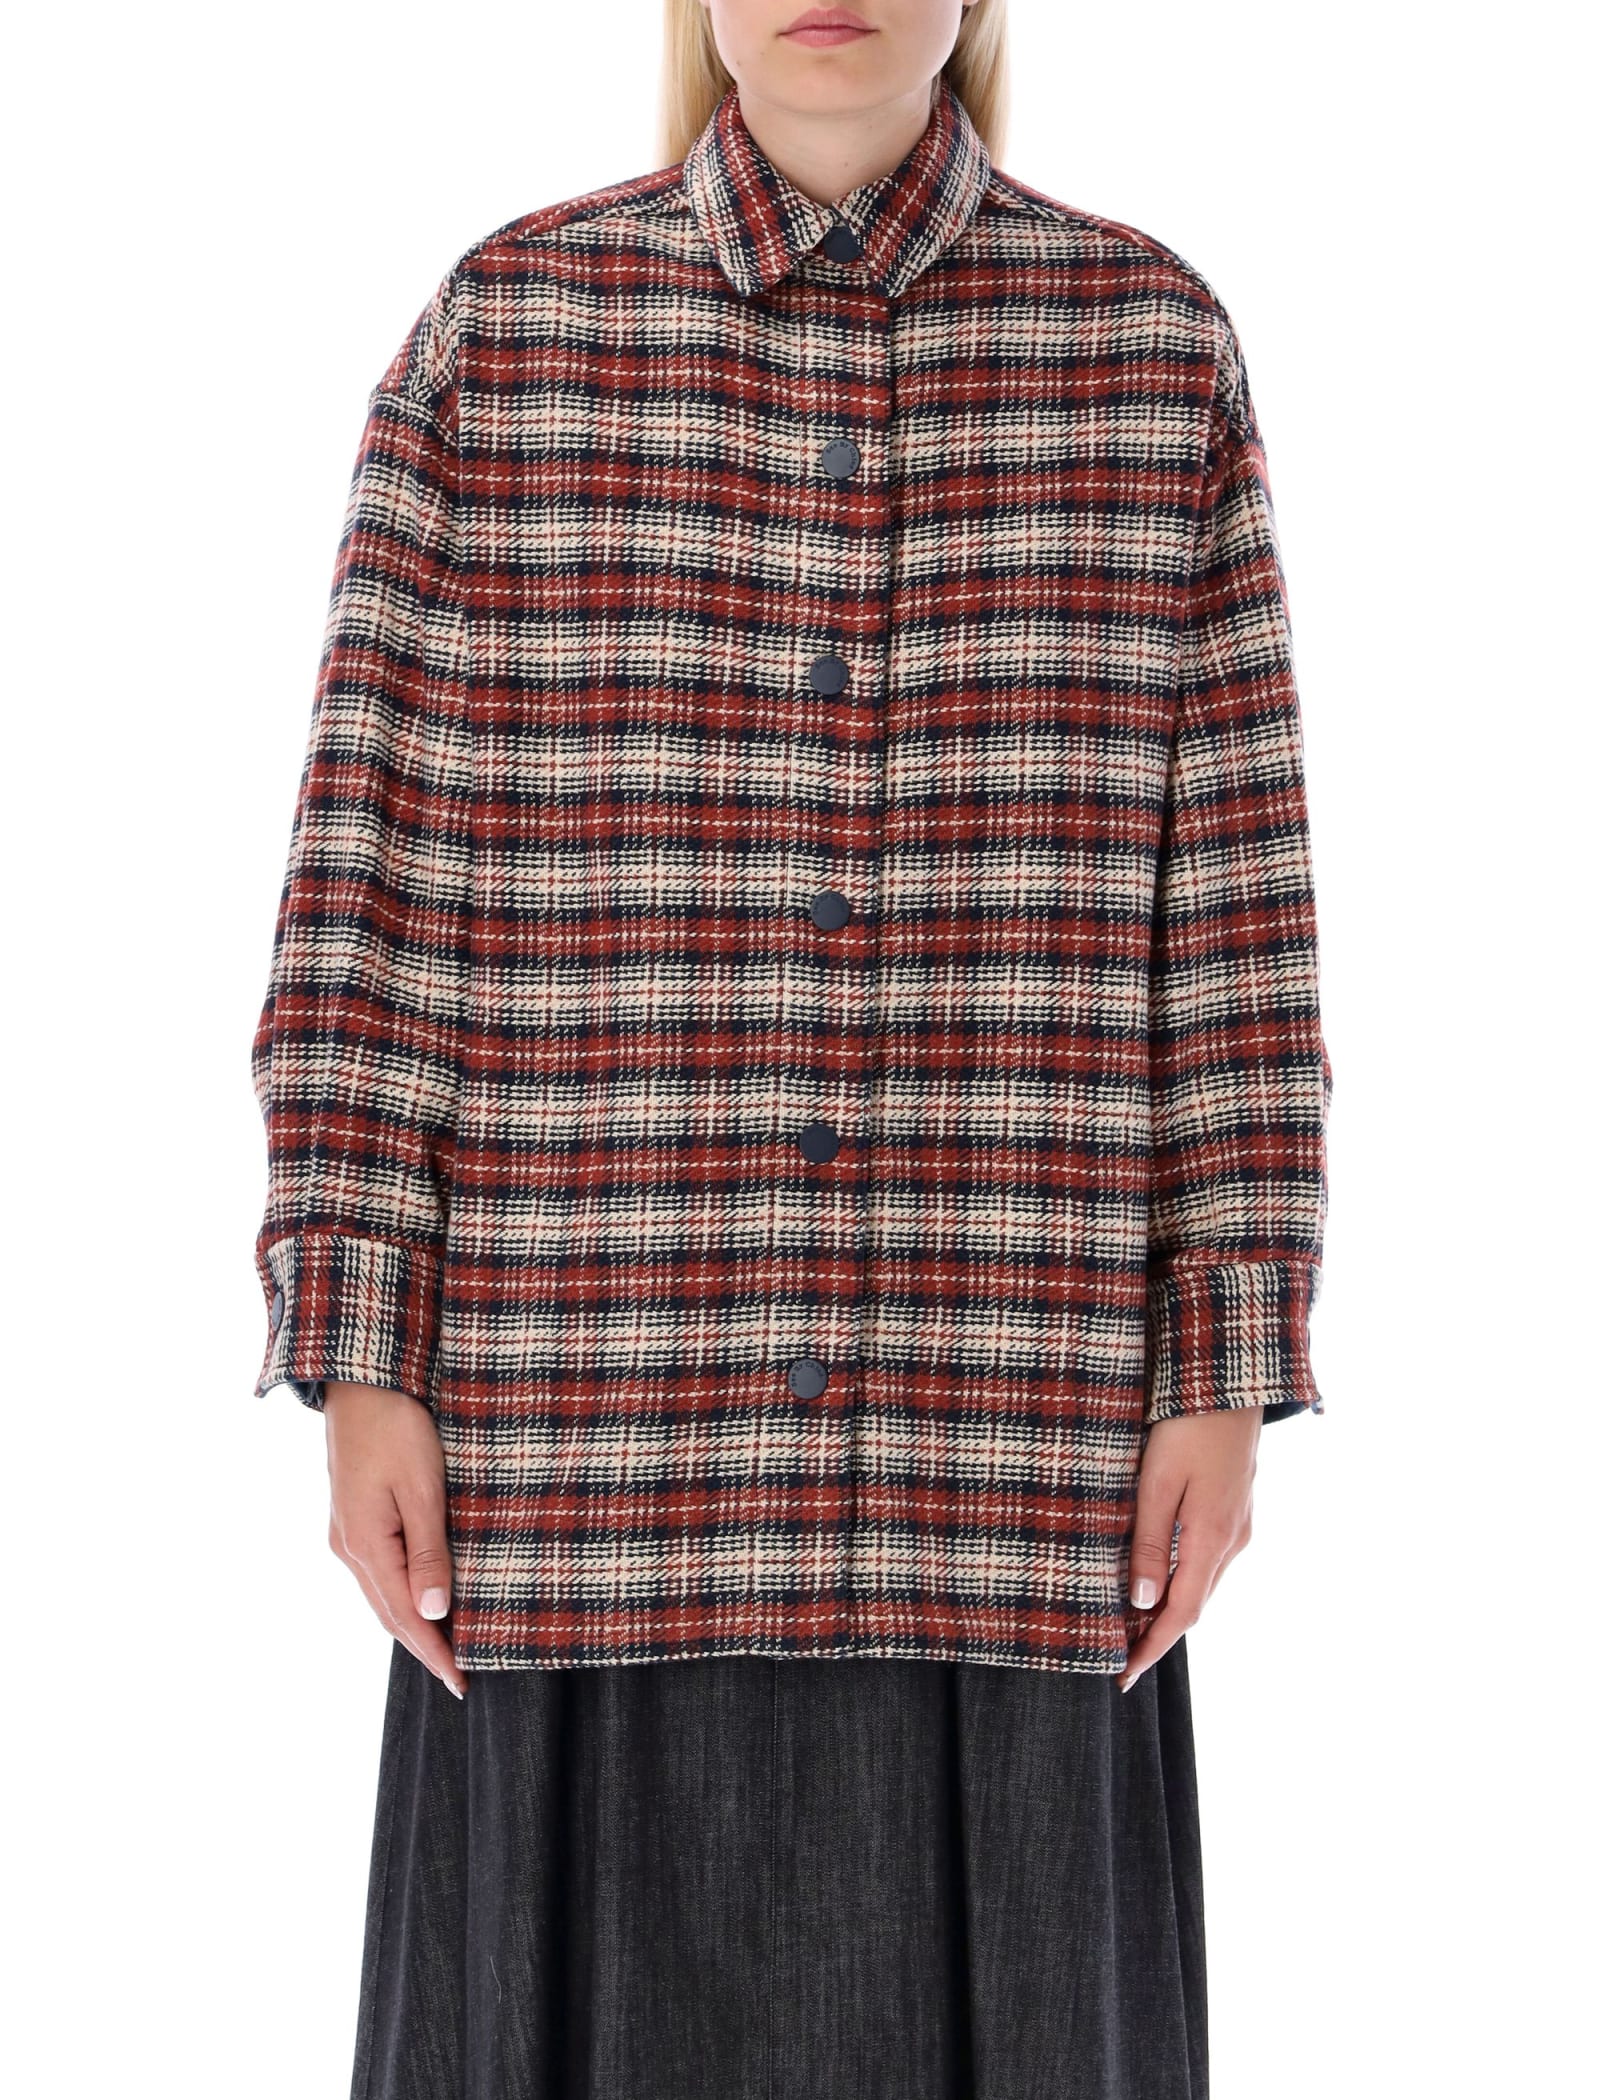 SEE BY CHLOÉ OVERSIZED SHIRT JACKET